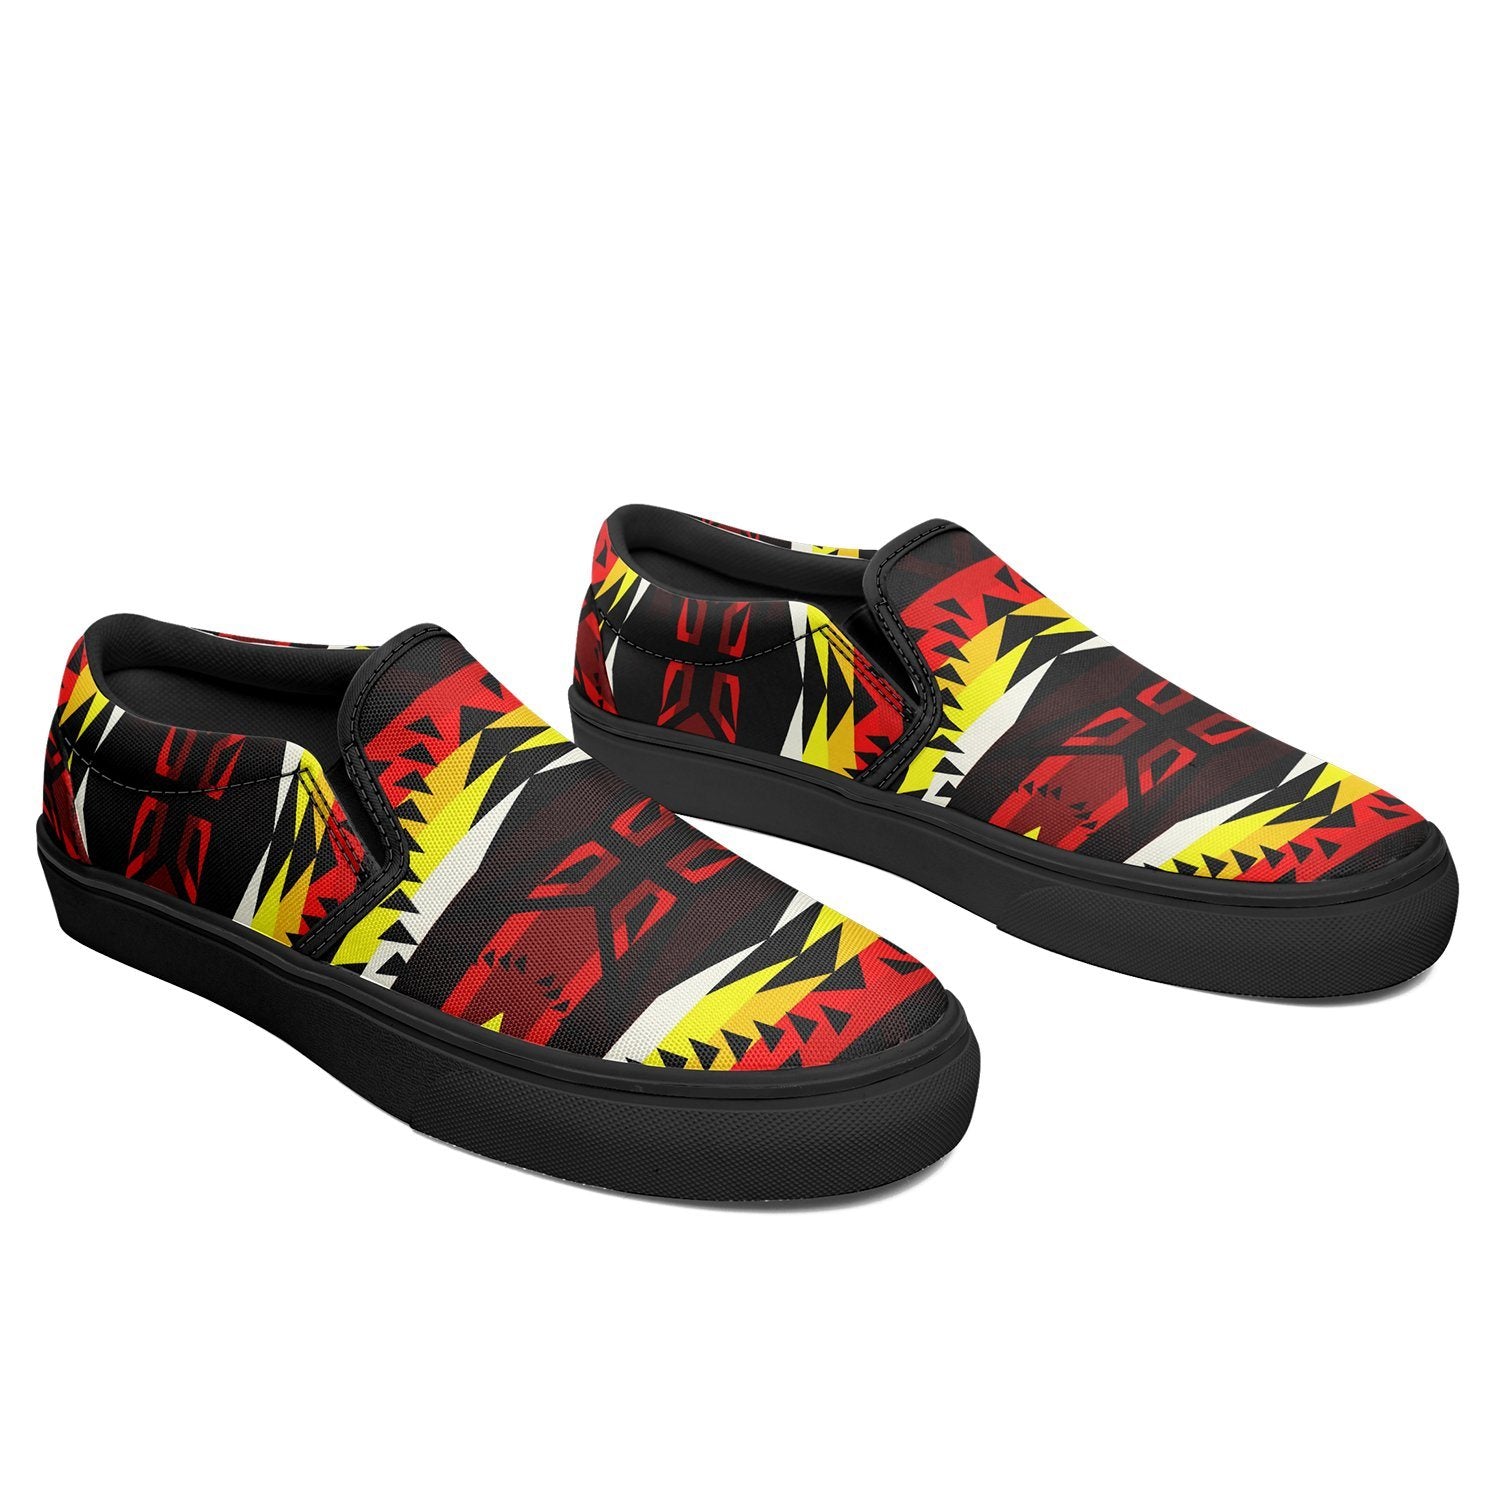 Canyon War Party Otoyimm Canvas Slip On Shoes 49 Dzine 